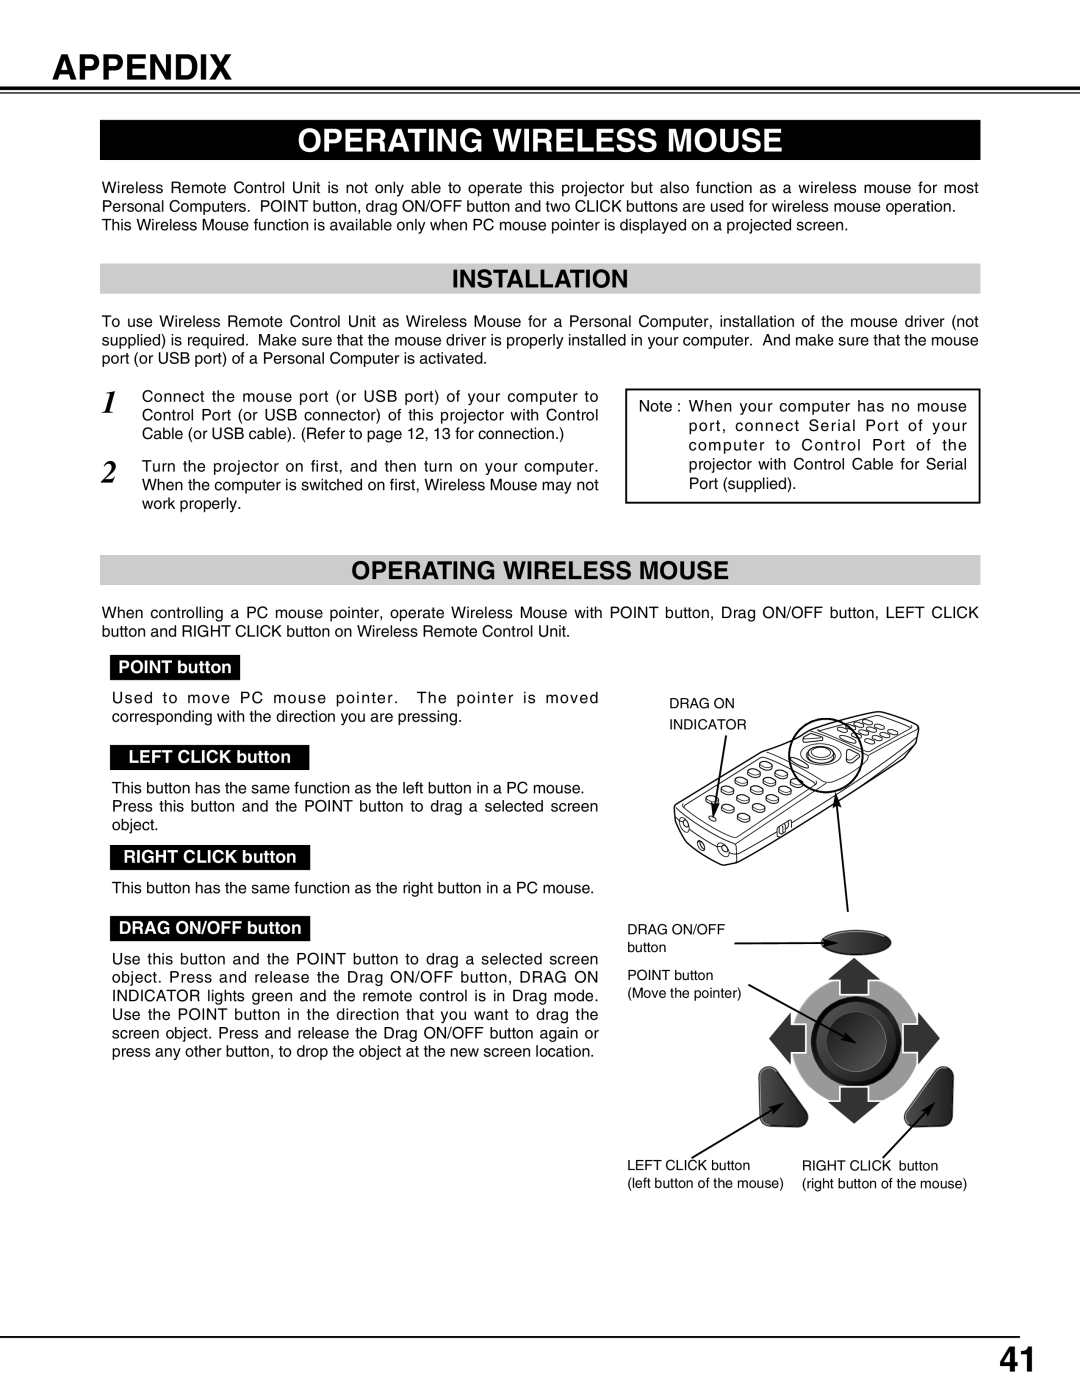 Eiki LC-X70 instruction manual Appendix, Operating Wireless Mouse, Installation 